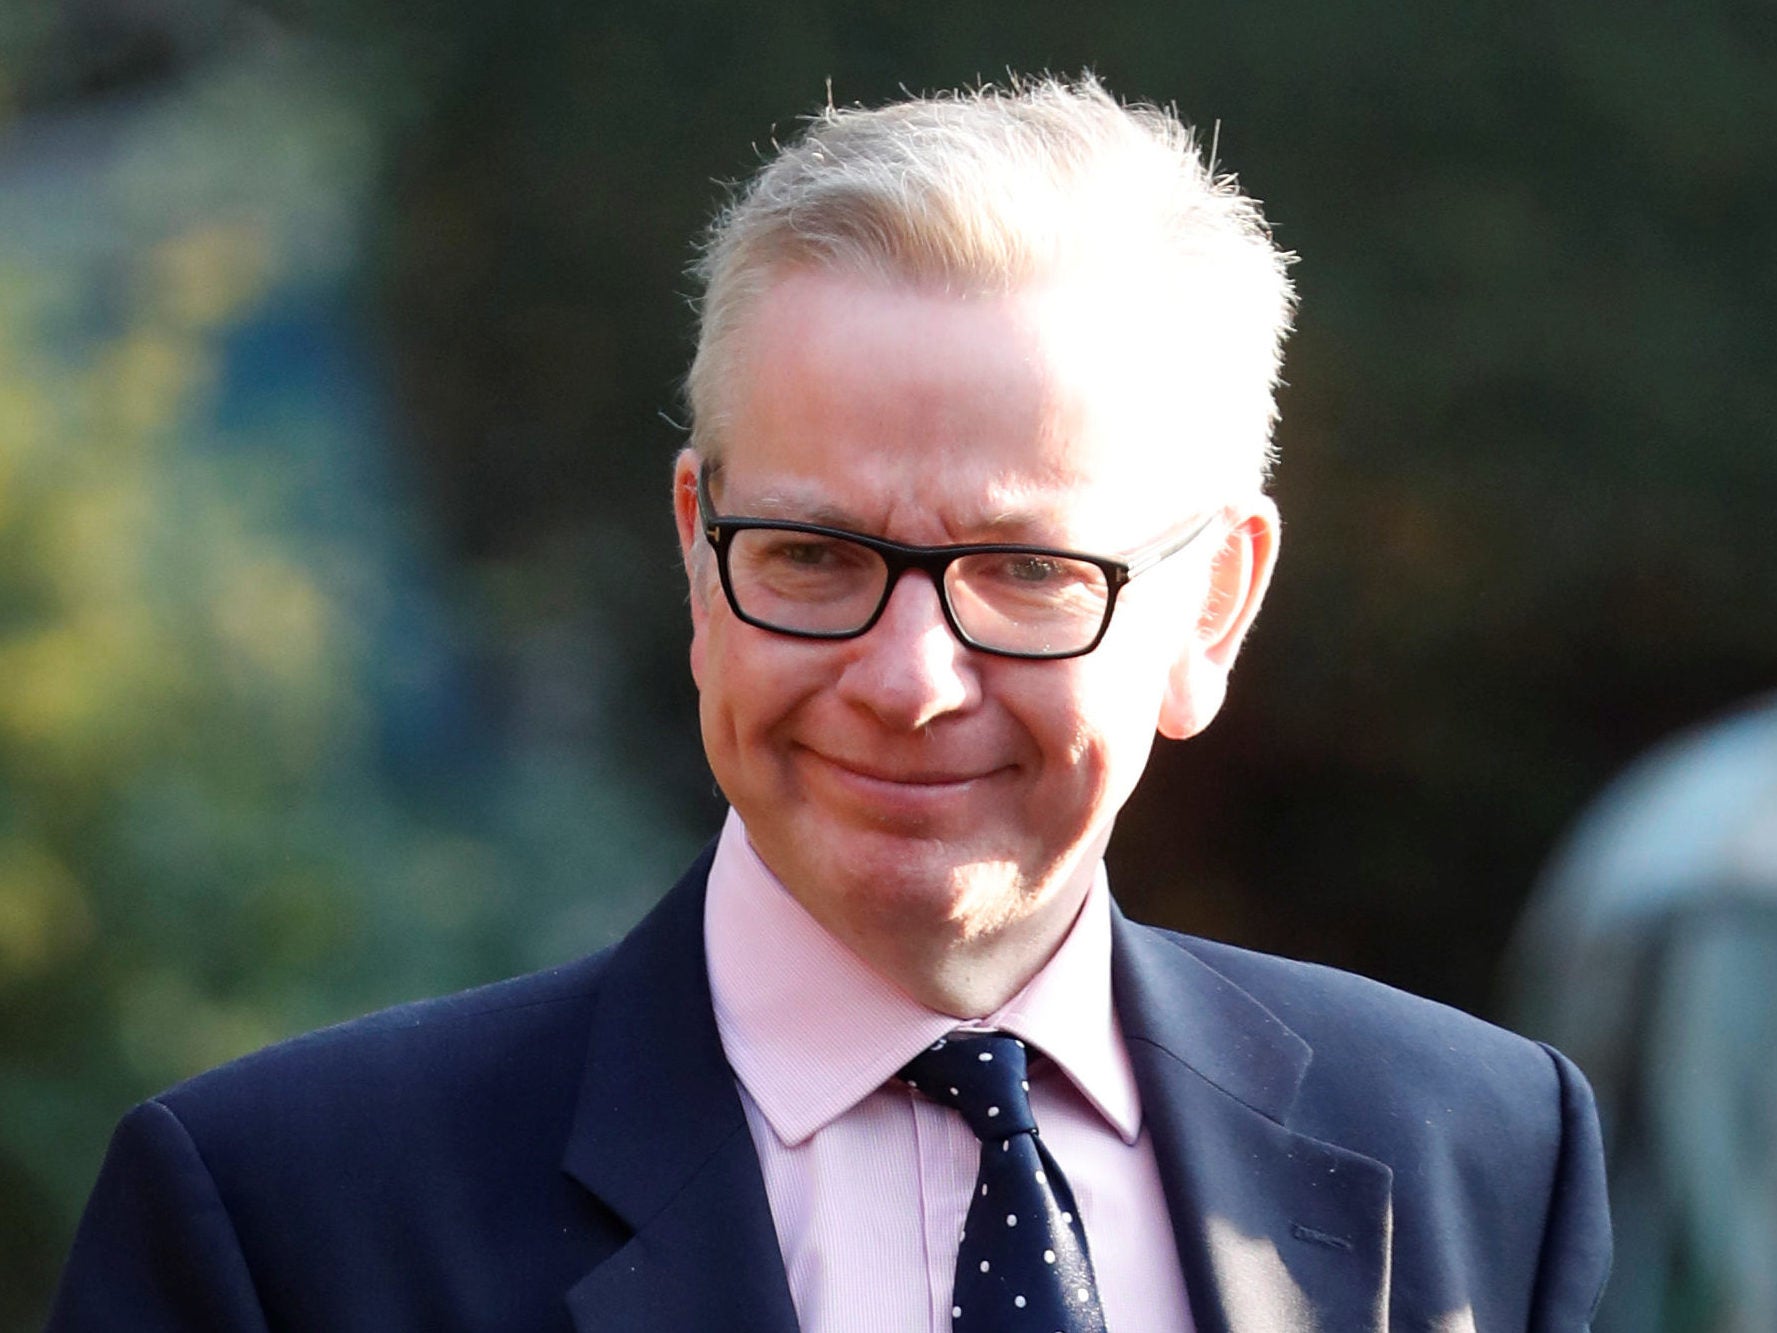 Michael Gove says decline of local media 'one of the sadnesses of my adult lifetime' as he backs news trade in charity speech